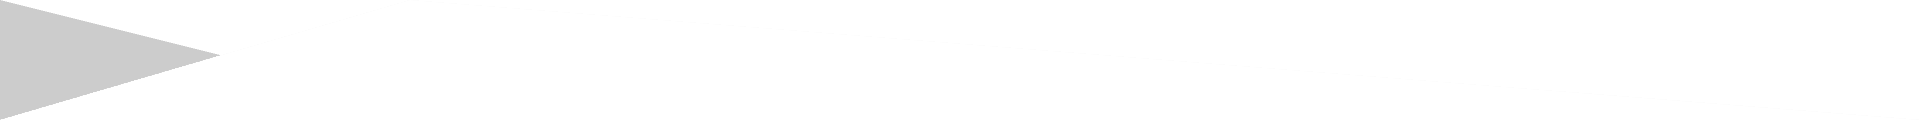 A green and white background with a line going across it.